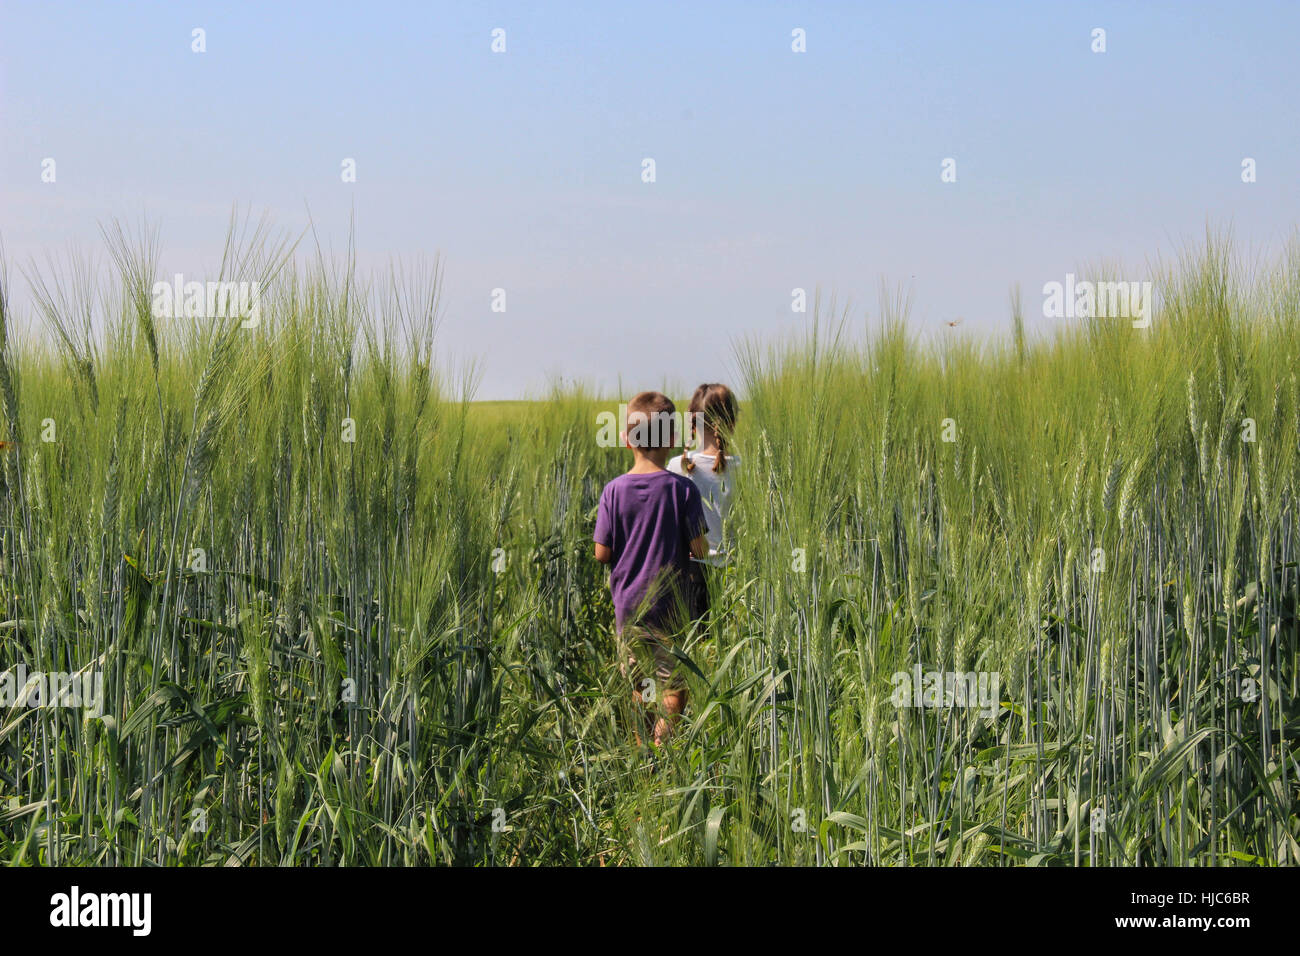 My children enjoying getting lost in a wheat field in Canada. Stock Photo